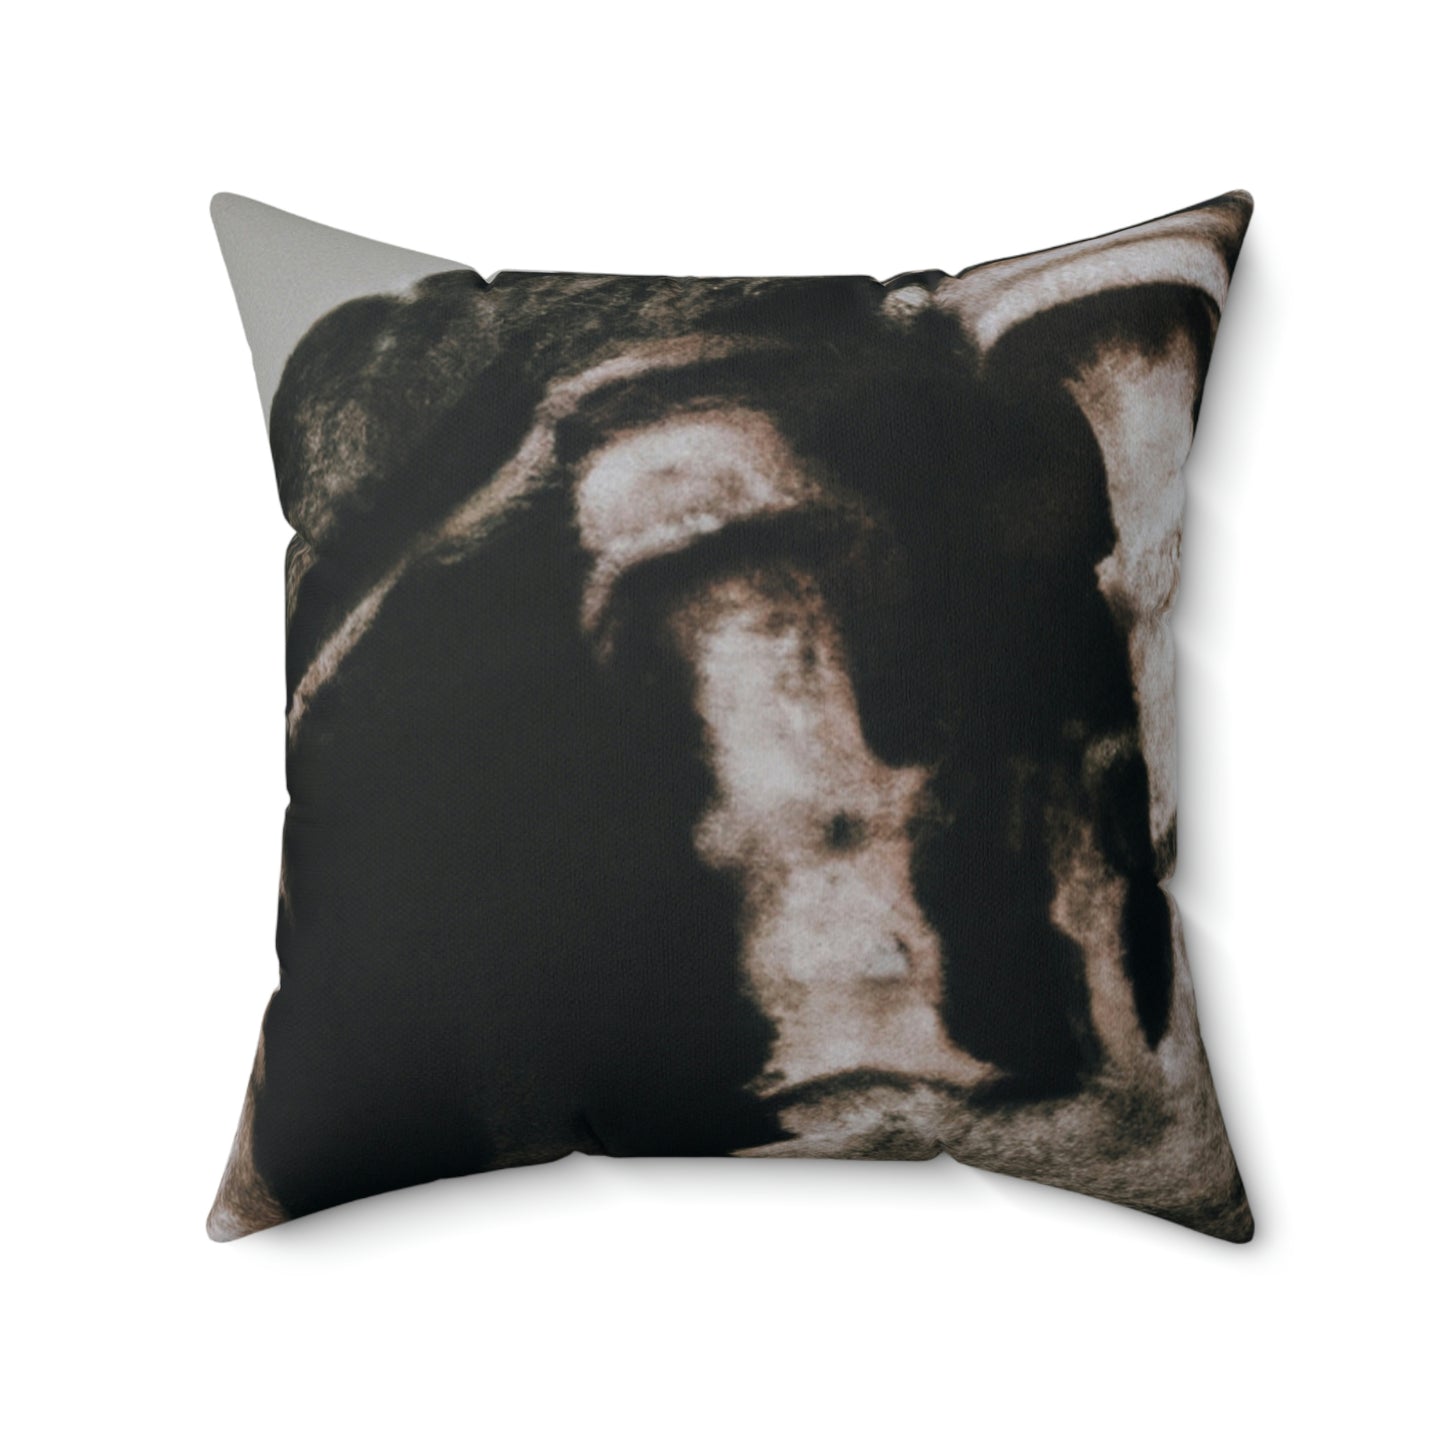 "The Forgotten God of the Ancient Temple" - The Alien Square Pillow